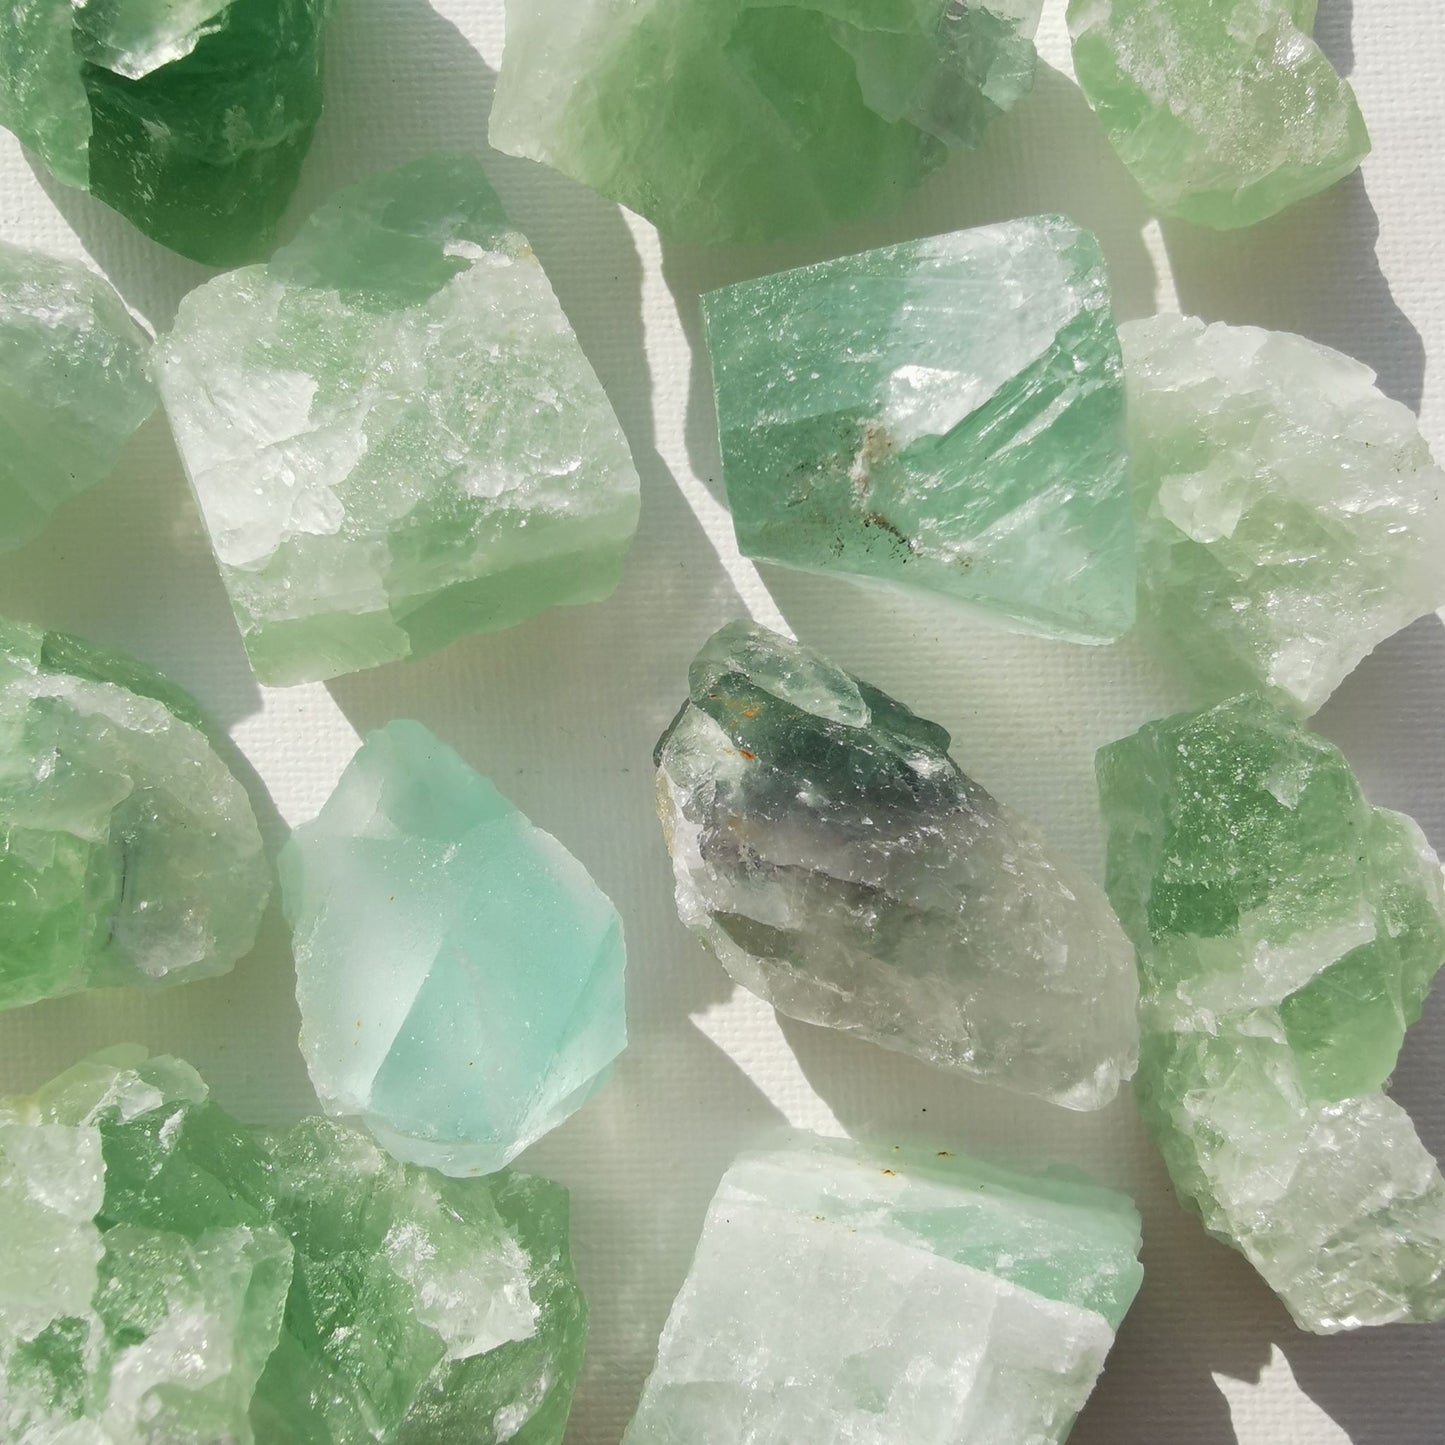 Dumi's Crystals | Rough Green Fluorite Crystals (Balance & Focus) | A collection of Rough Green Fluorite Crystals, reminders of your inner harmony. Green Fluorite fosters peace, reduces negativity & enhances focus. Scatter them in your home or workspace to create a calming environment, improve concentration & welcome holistic healing. Embrace the power of Rough Green Fluorite from Dumi's Crystals!